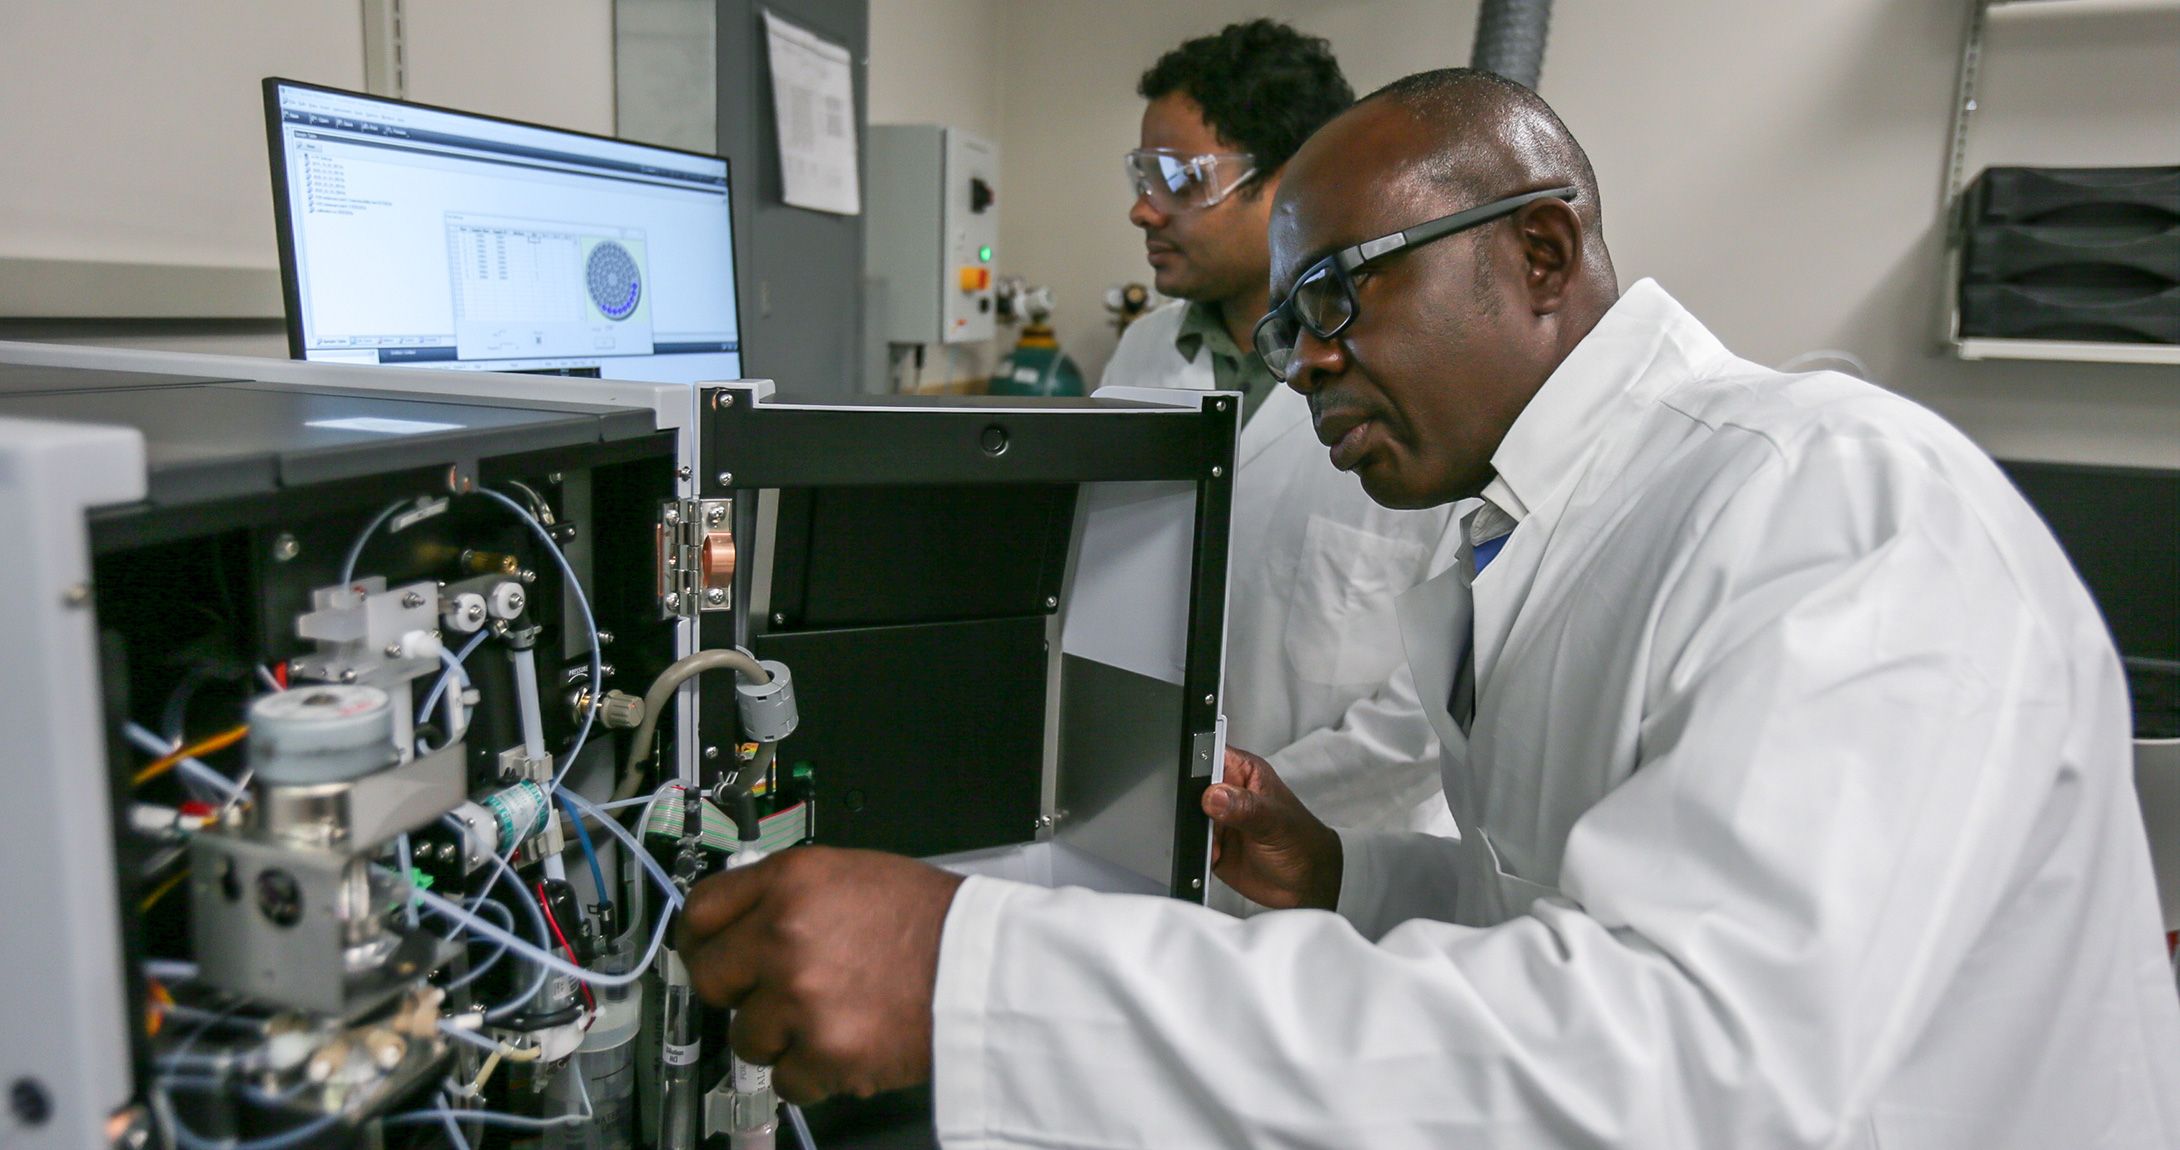 Director of Texas Water in Energy Institute, Dr. Nnanna, working in lab